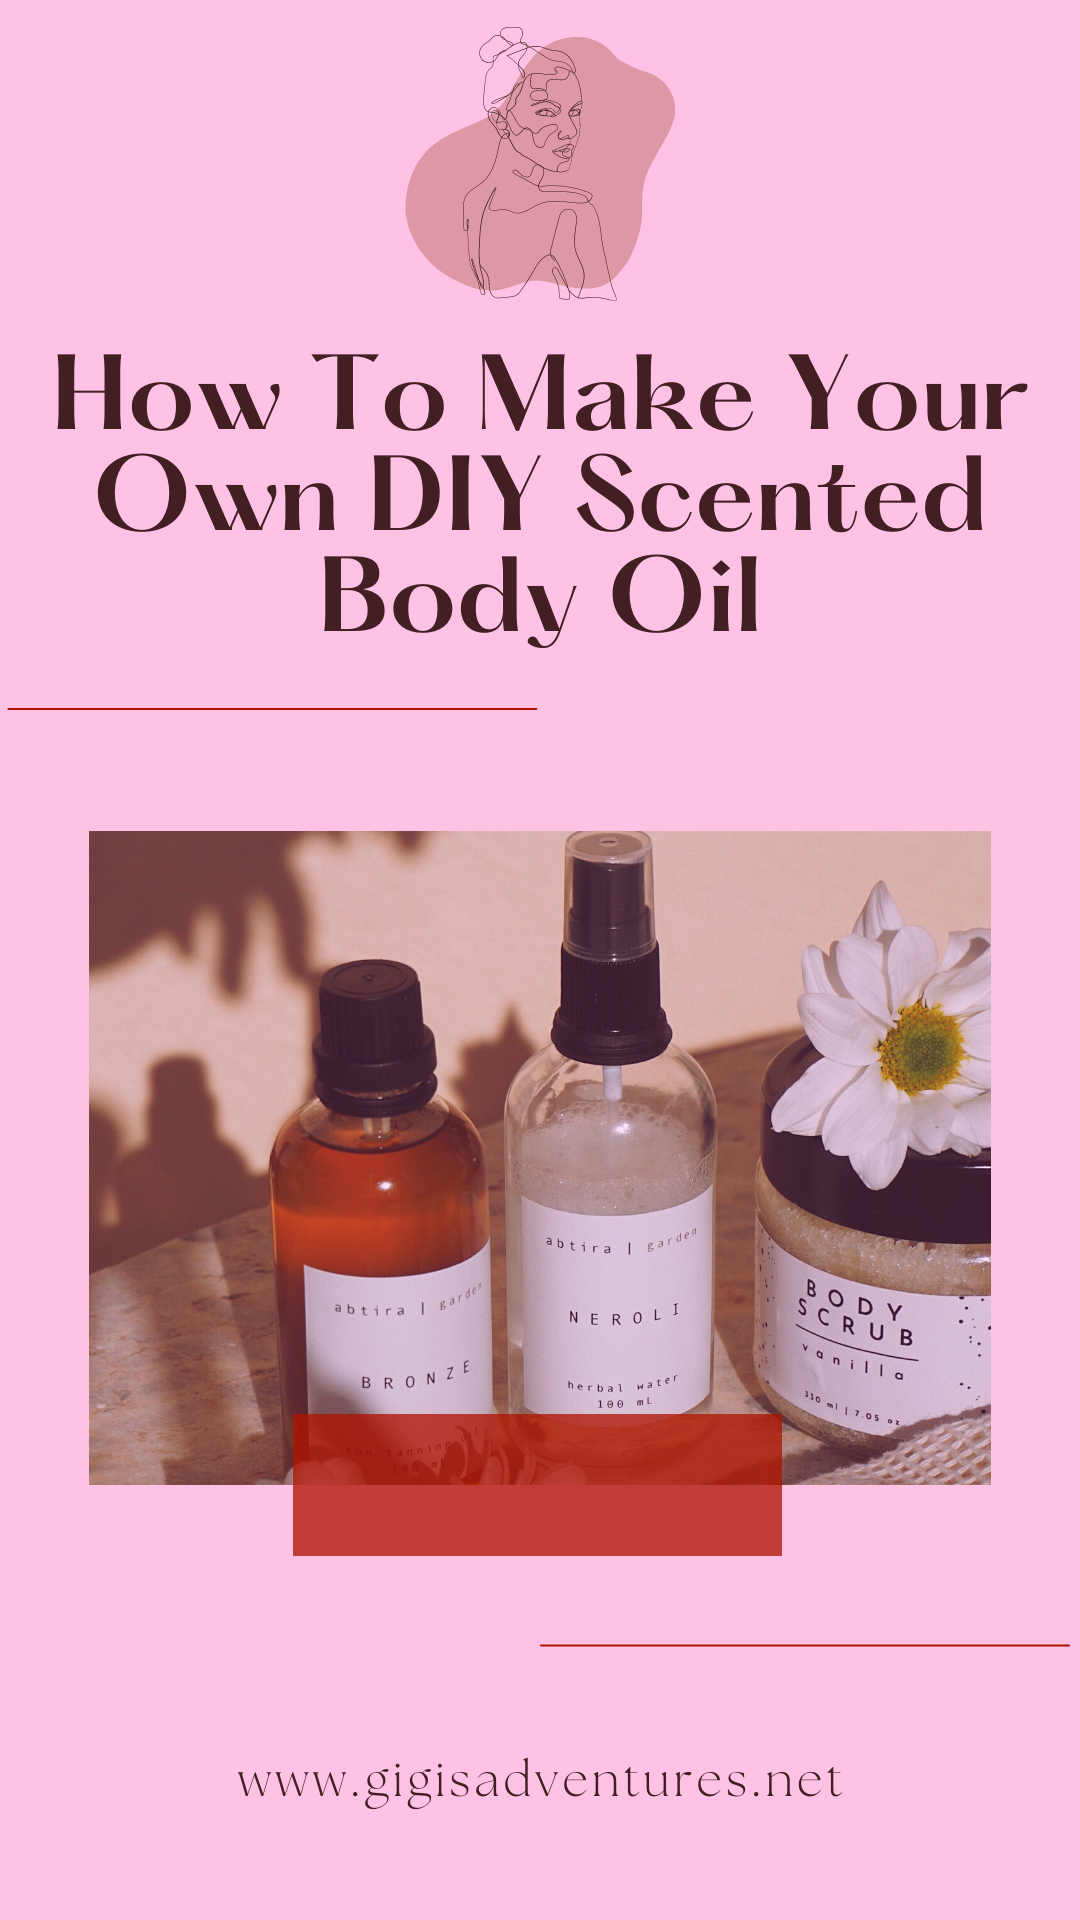 How To Make Your Own DIY Scented Body Oil - DIY Body Oil